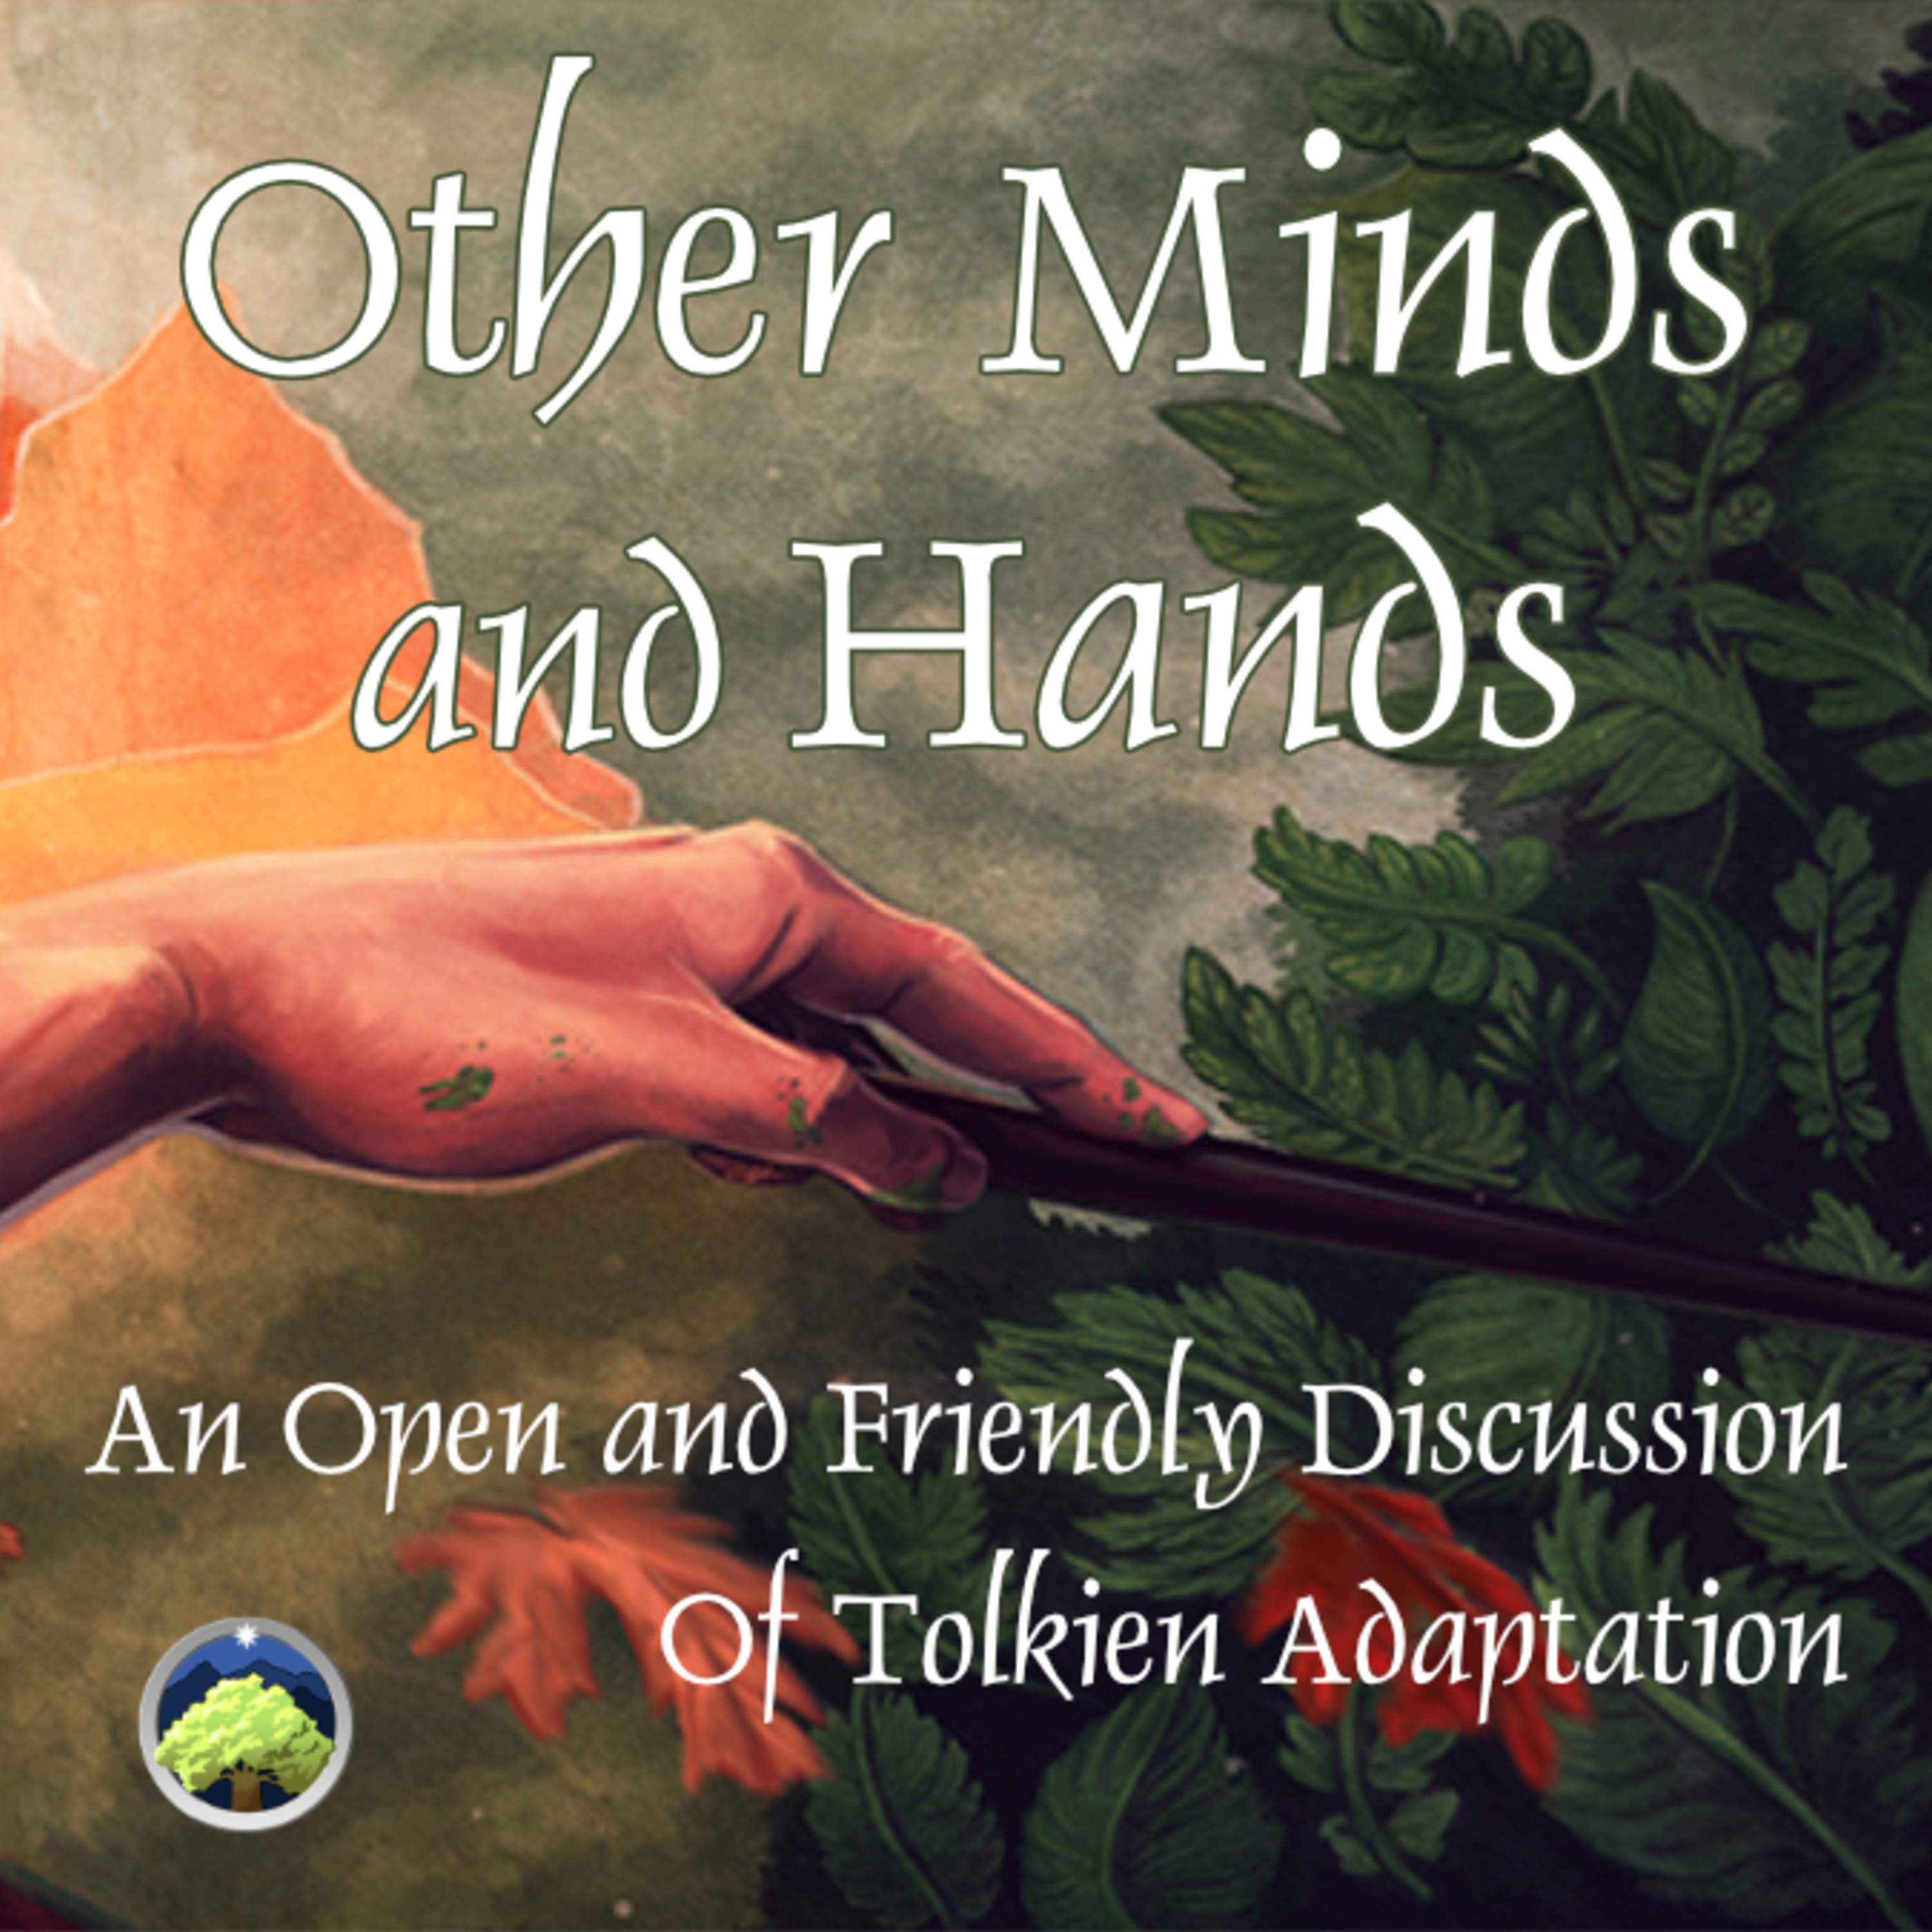 563: Other Minds and Hands, Episode 65